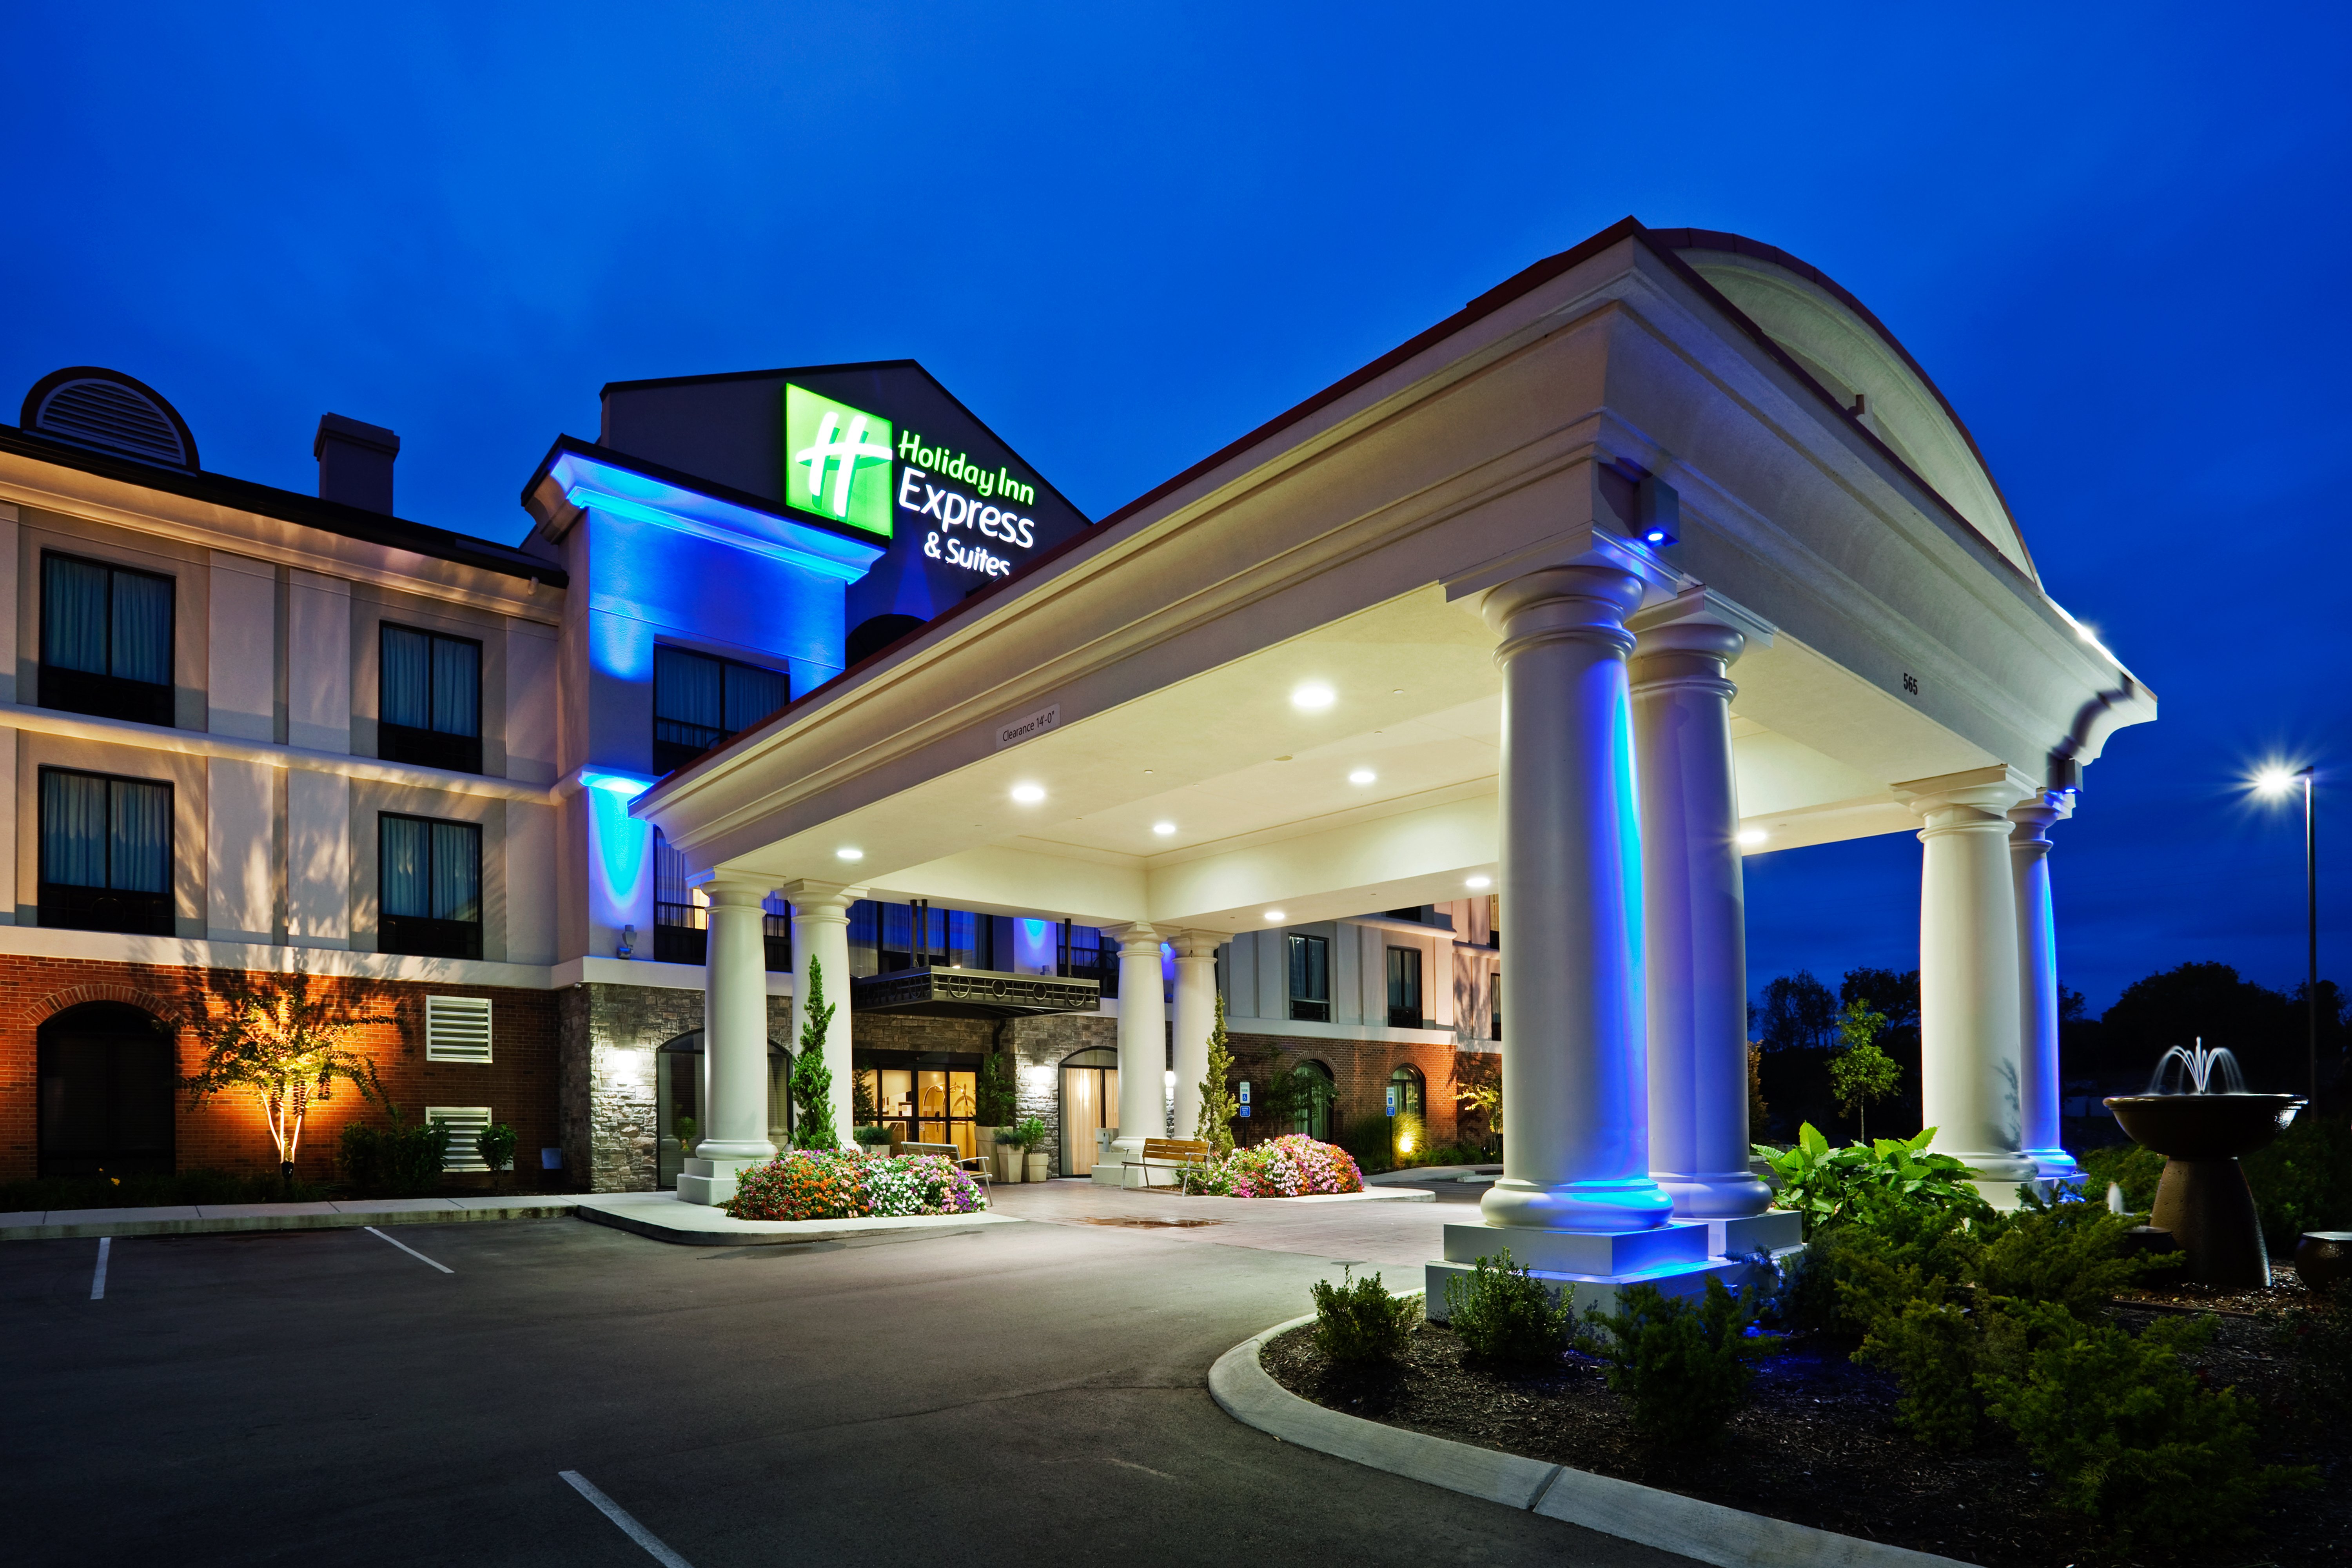 The Holiday Inn Express and Suites Mt. Juliet Welcomes YOU!